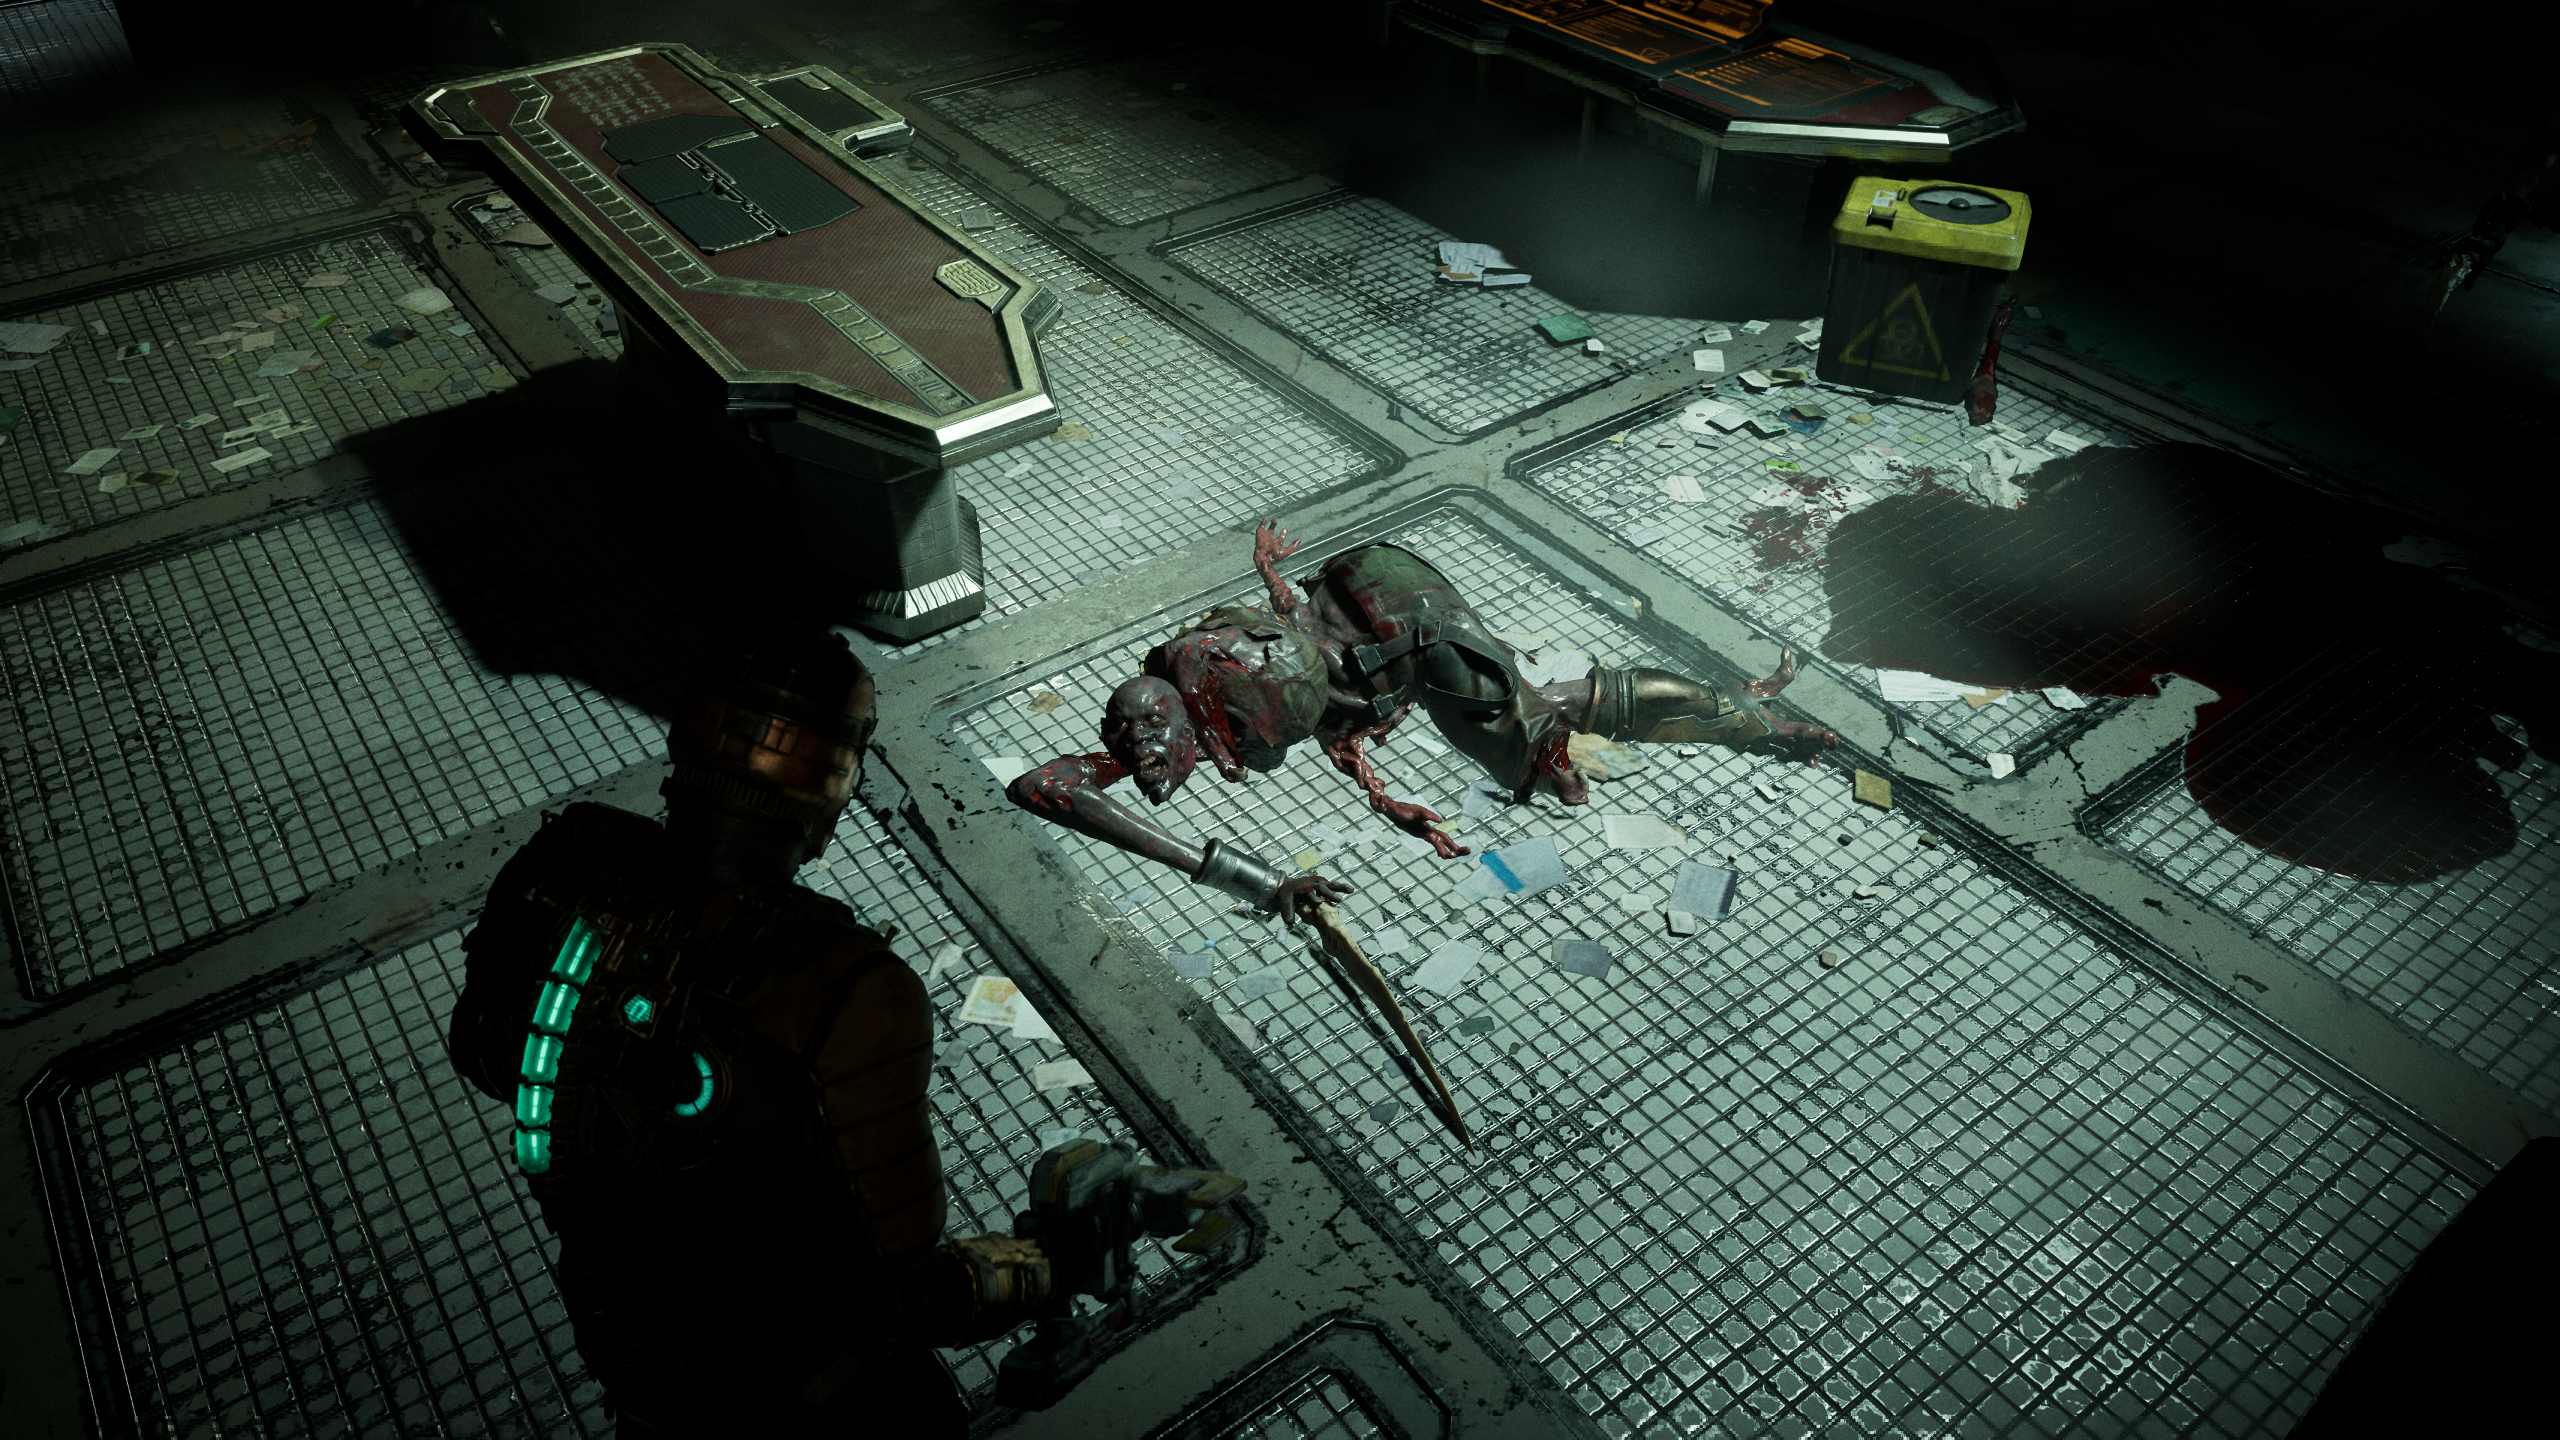 A dead Slasher necromorph lies on the ground in the Dead Space remake.